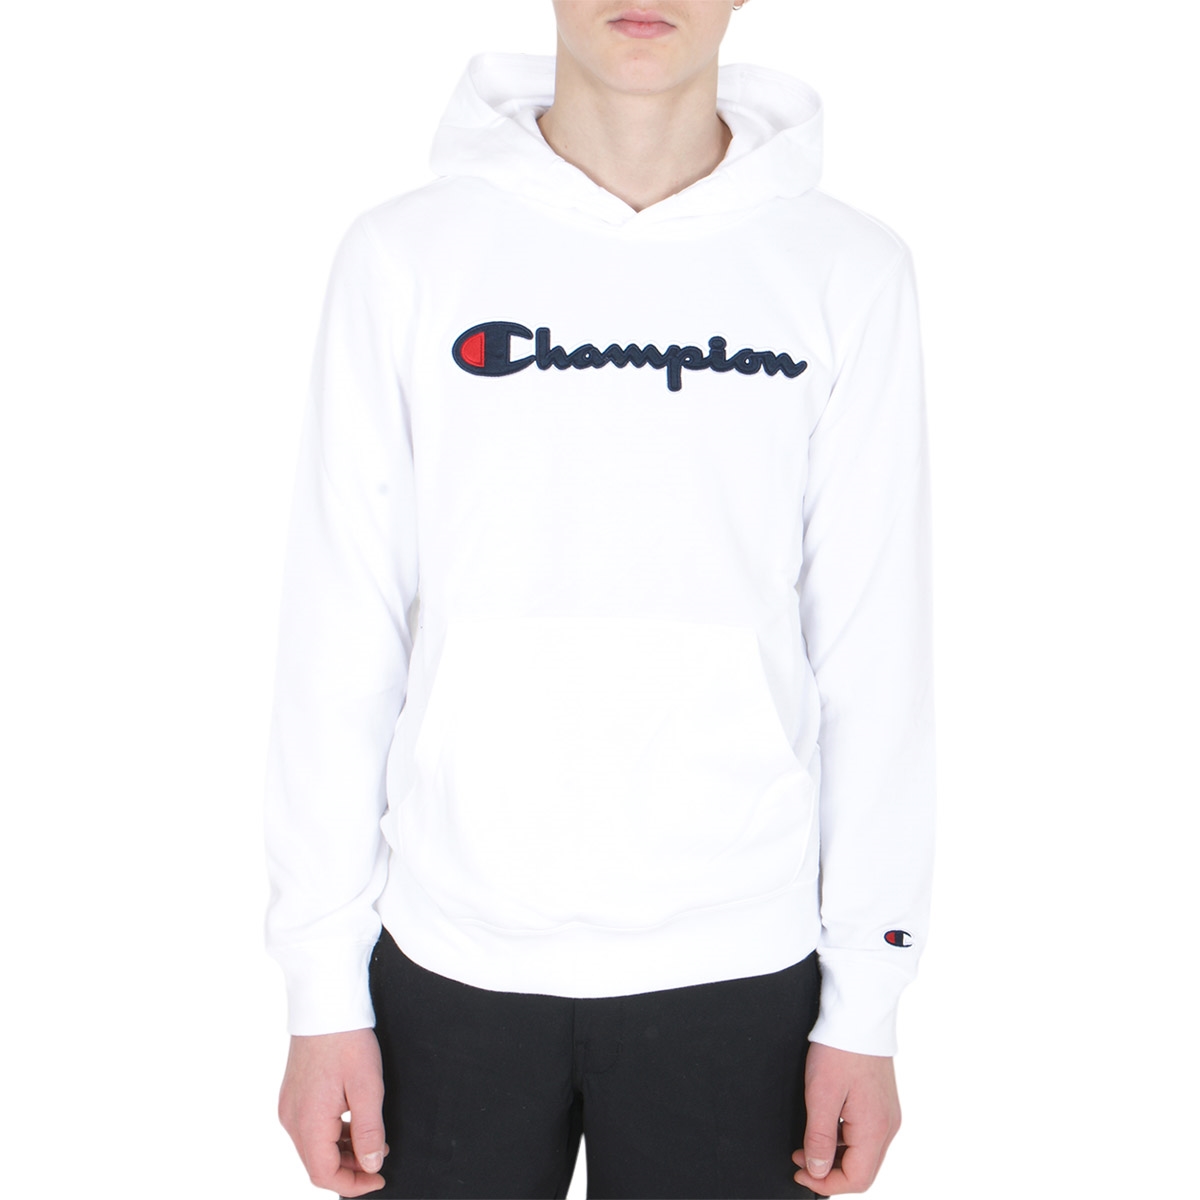 Tage med personificering Stræbe Champion Hooded Sweatshirt 305765 WHT